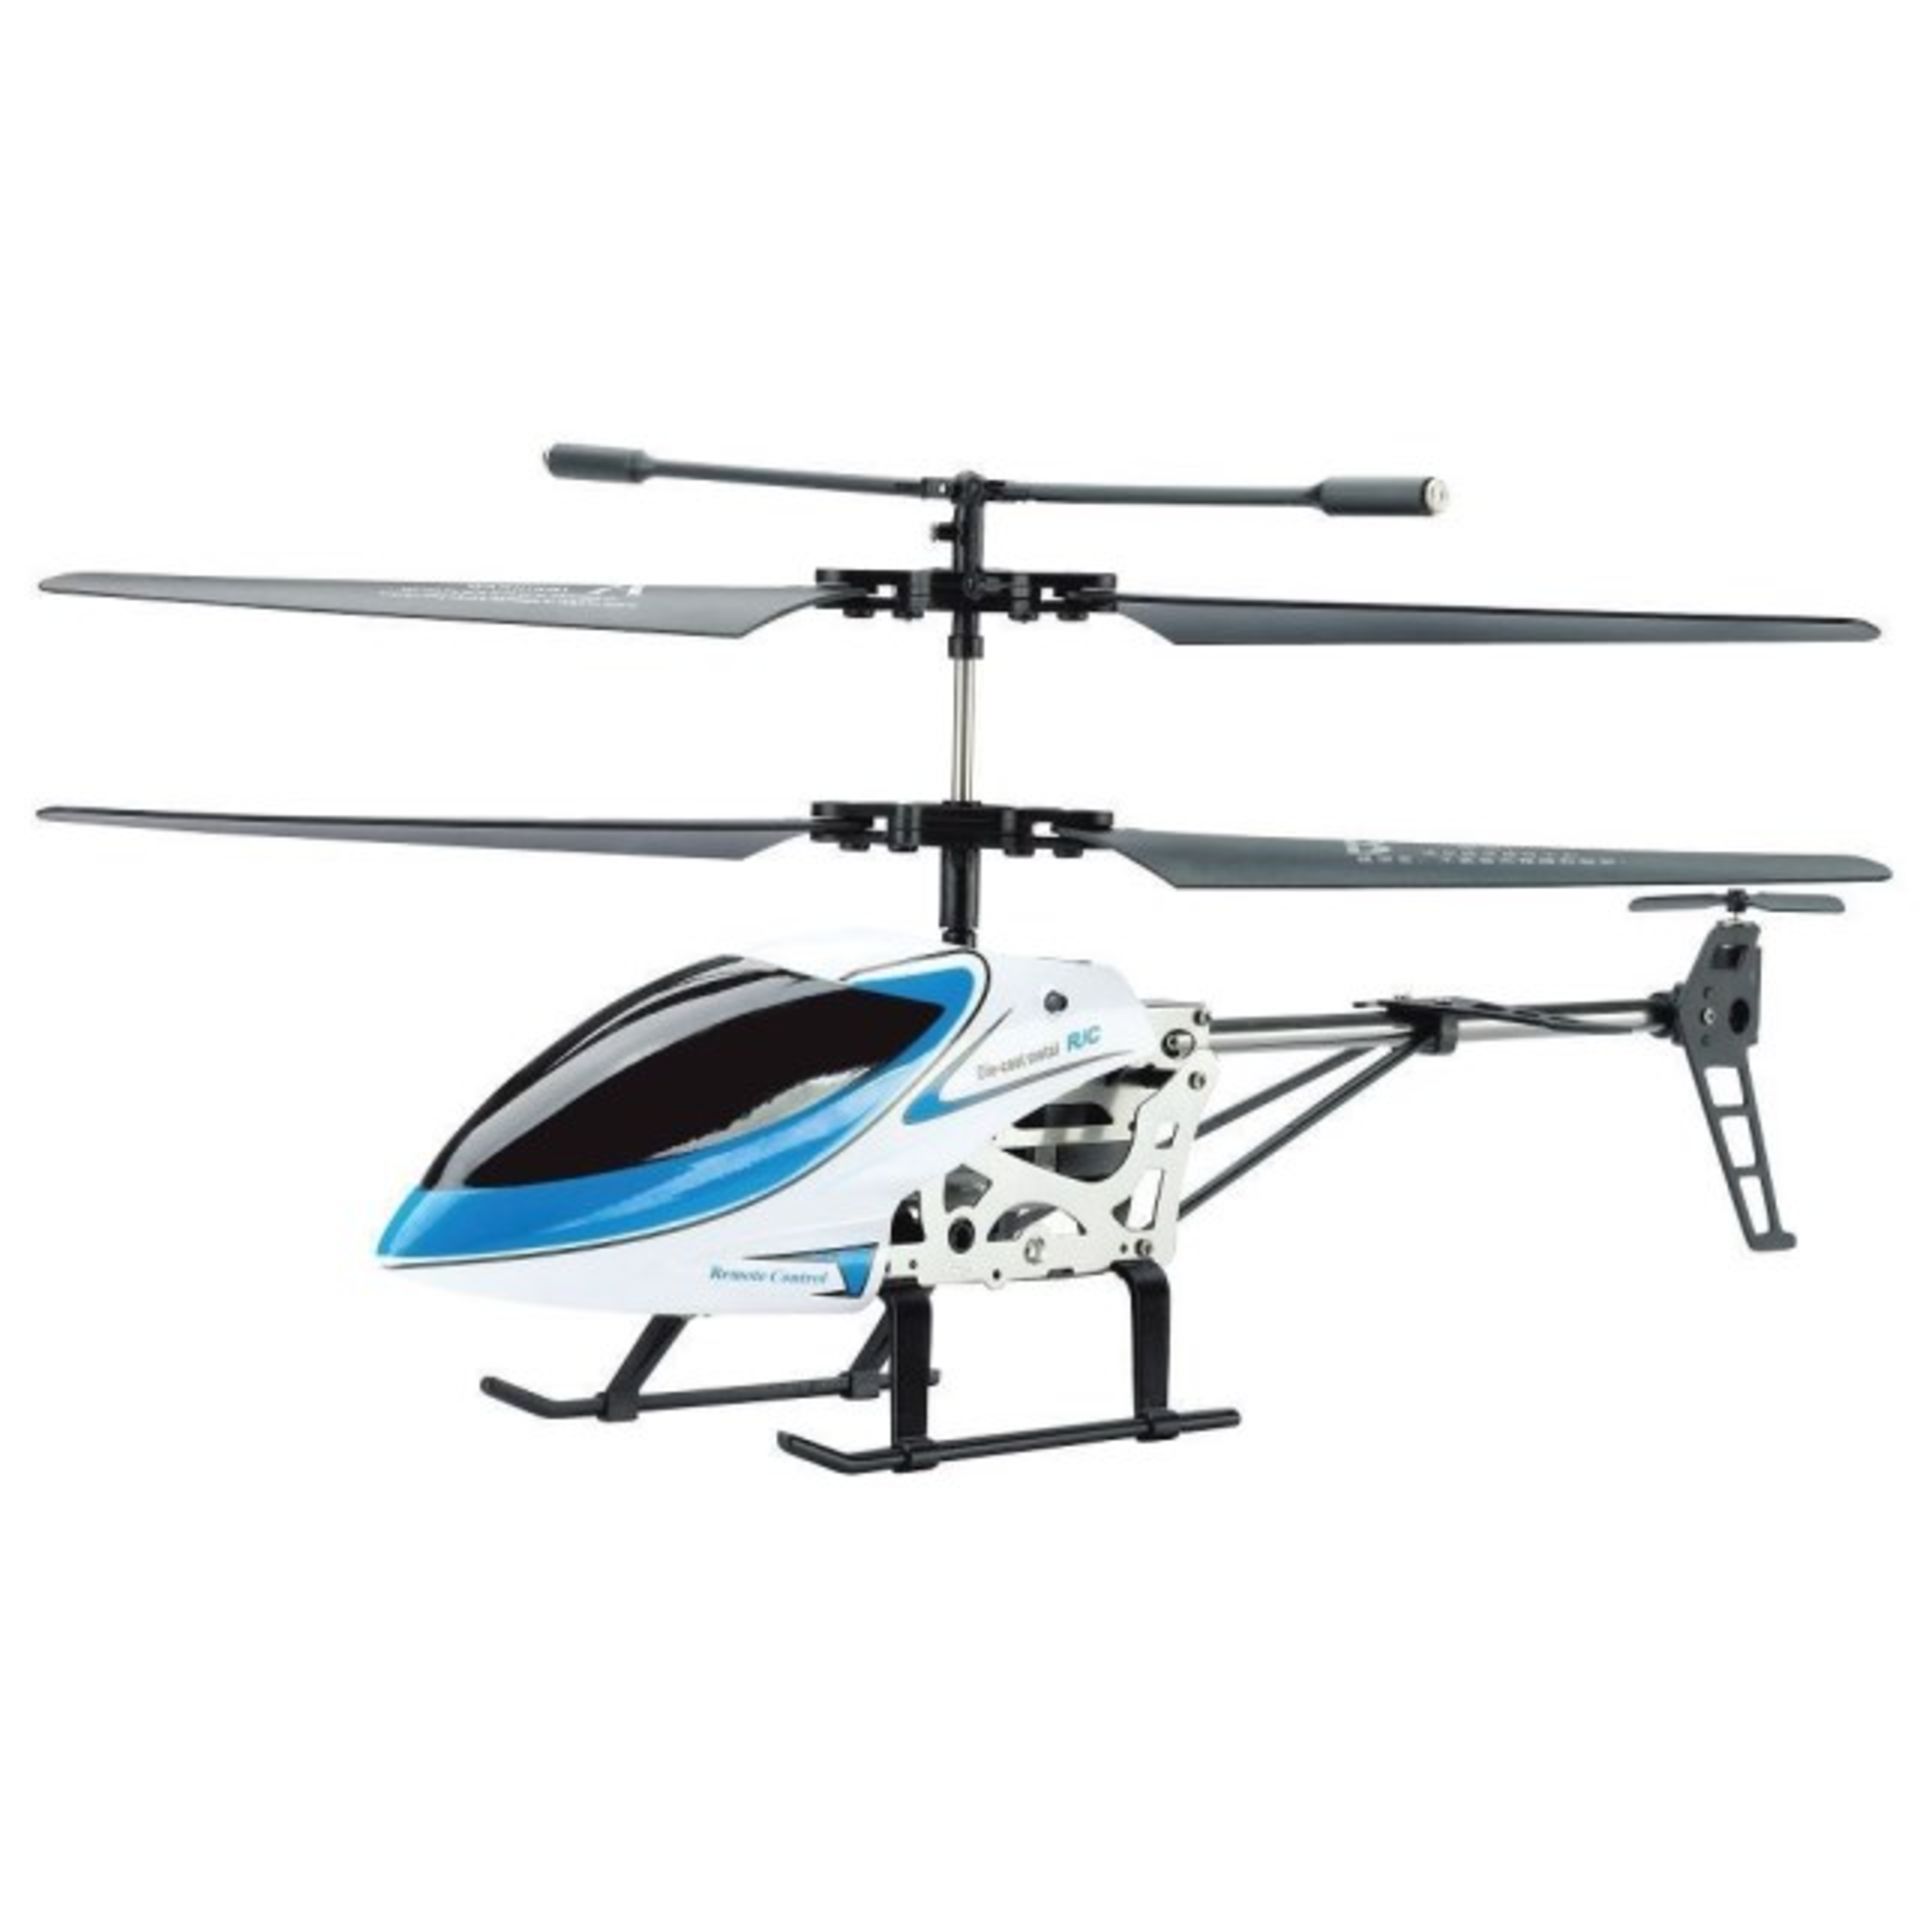 V Brand New 3.5 Channel Infra-Red Control Helicopter Super Steady Rotor Blade System Die cast